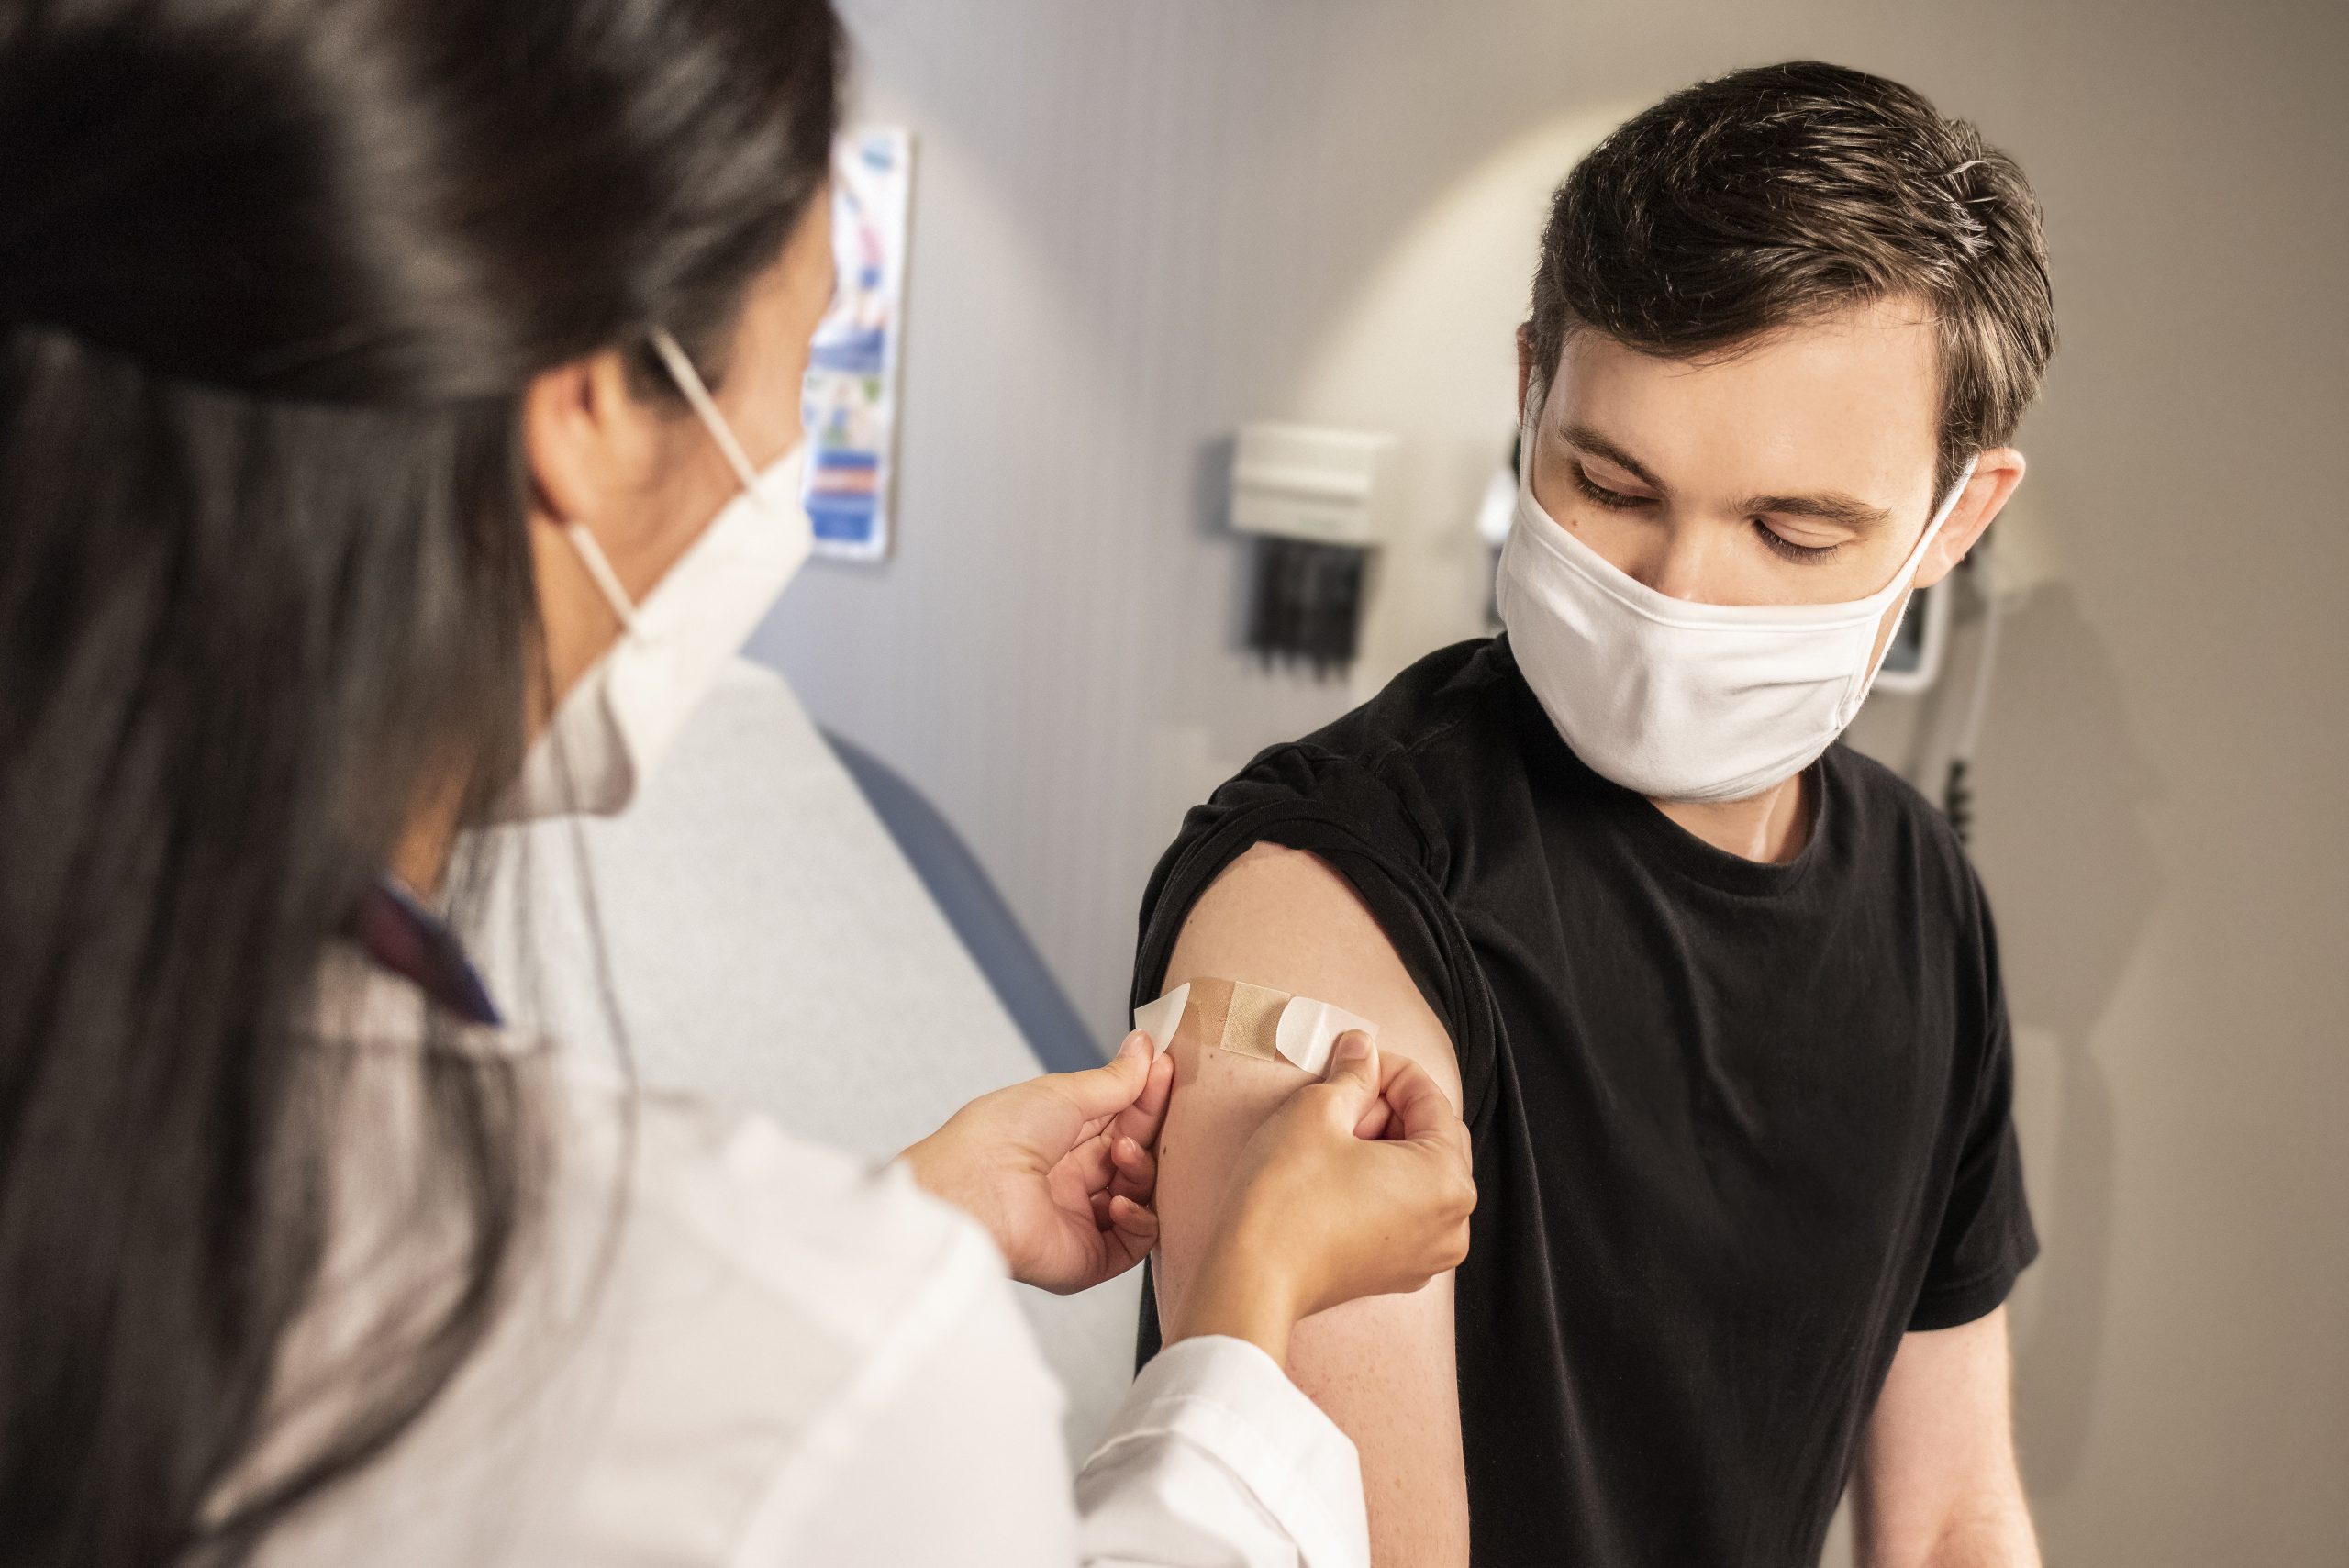 Doctor placing plaster on patient's arm after vaccination